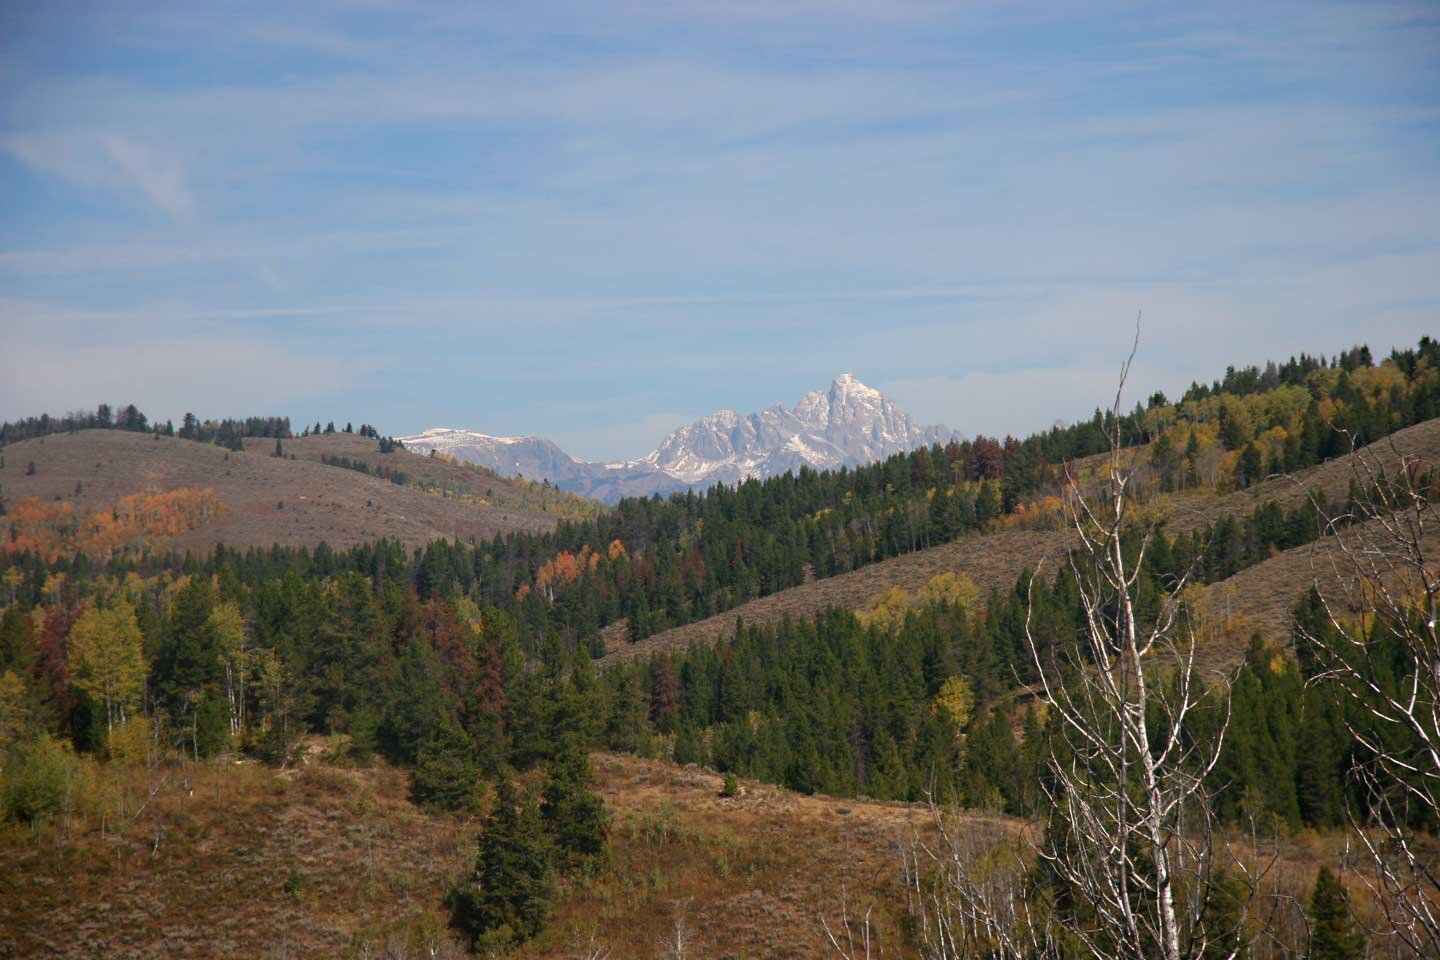 View of the Teton Range in the distance from site